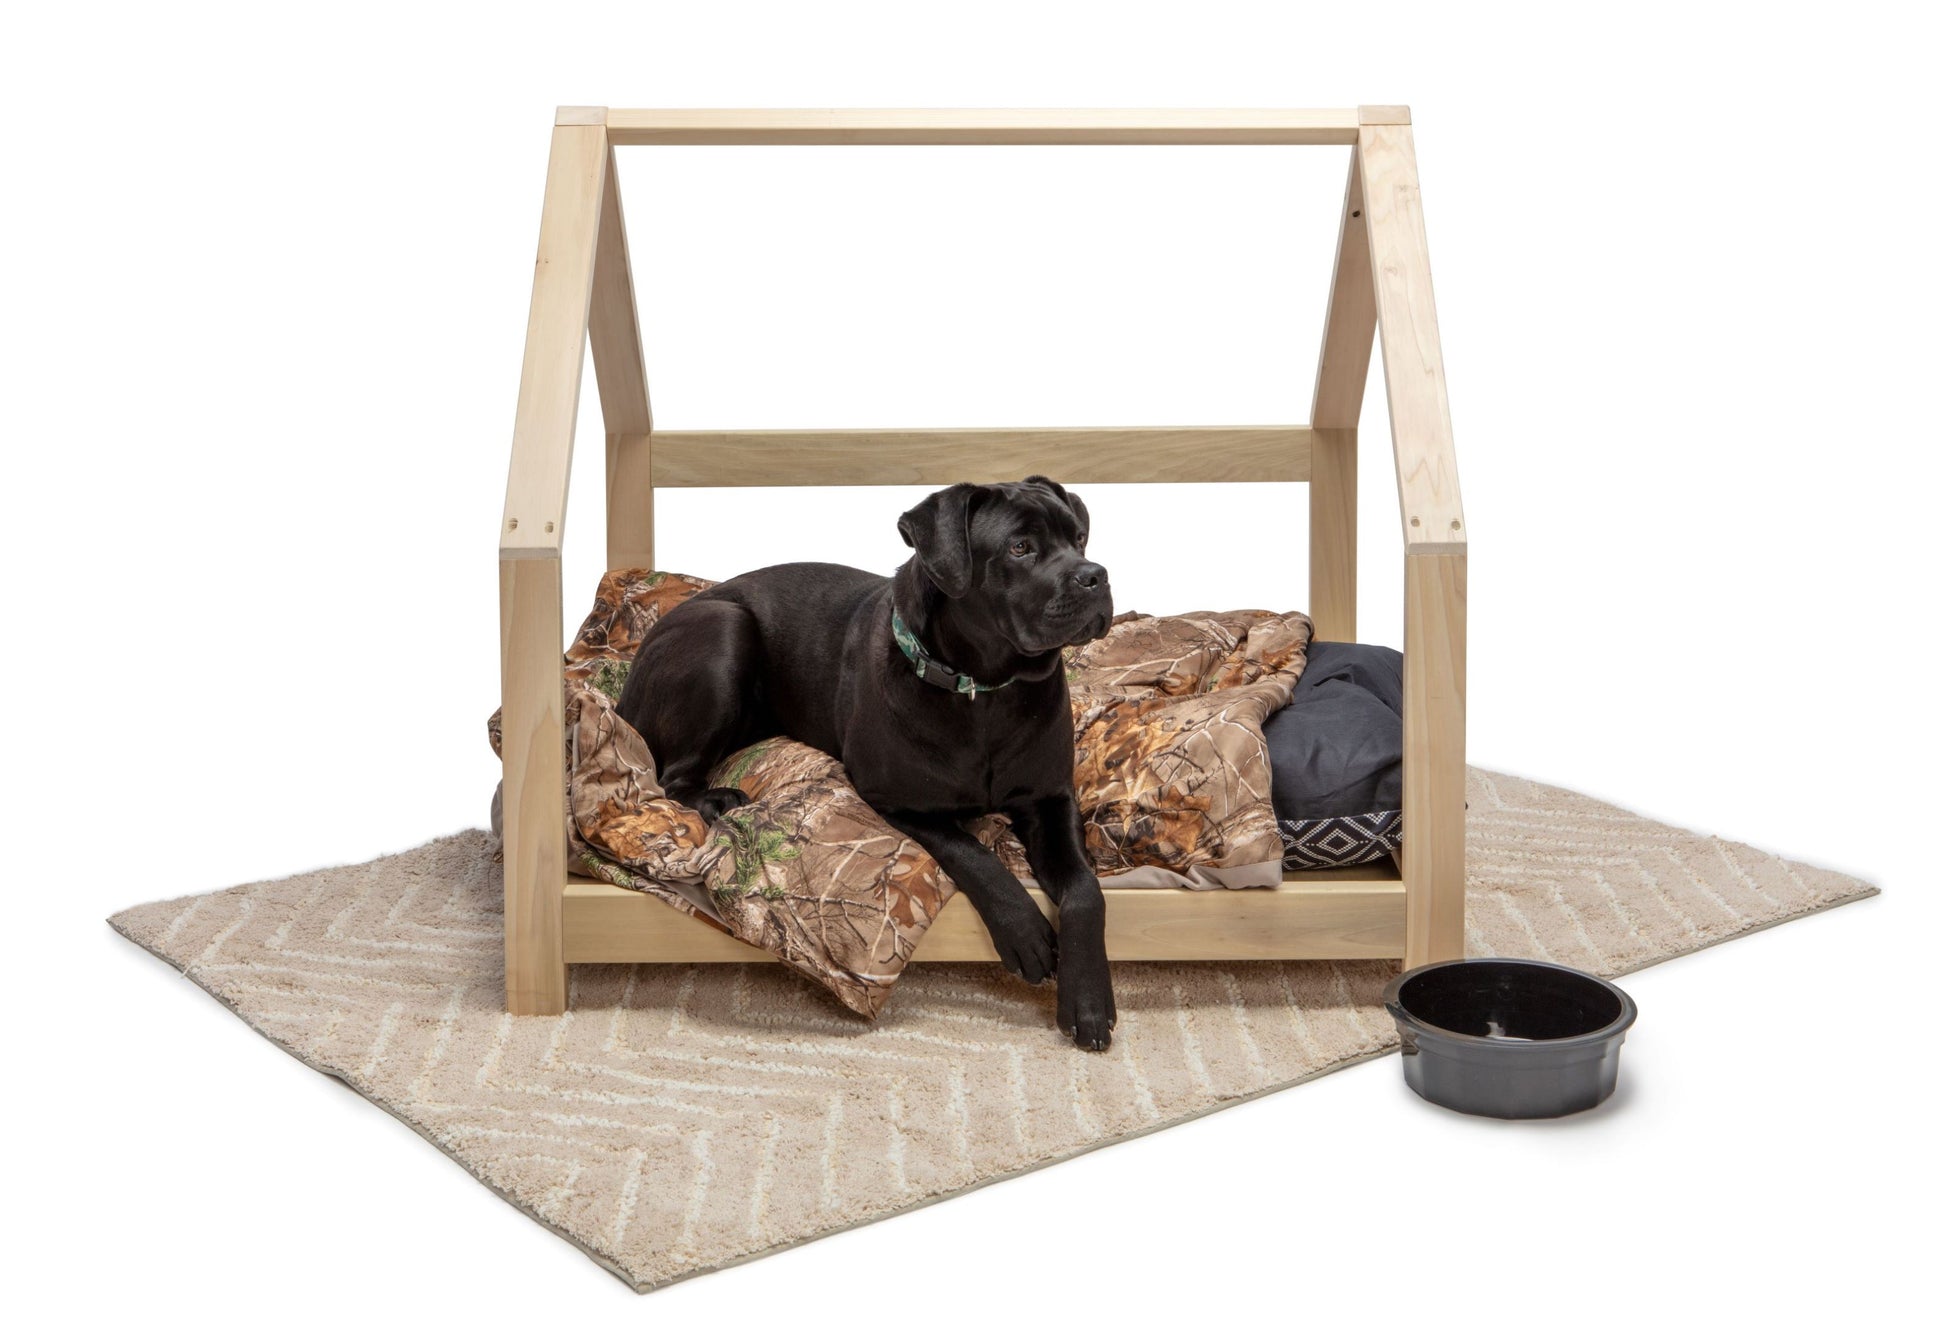 A large pet bed crafted entirely from smooth wood, designed for small animals such as cats or small dogs. The bed features a simple yet elegant frame, with rounded corners for comfort and safety. Inside, a soft cushion provides a cozy spot for pets to rest and relax. Placed in a cozy corner of the room with a small blanket nearby, this wooden pet bed offers a stylish and comfortable retreat for furry companions to curl up in.